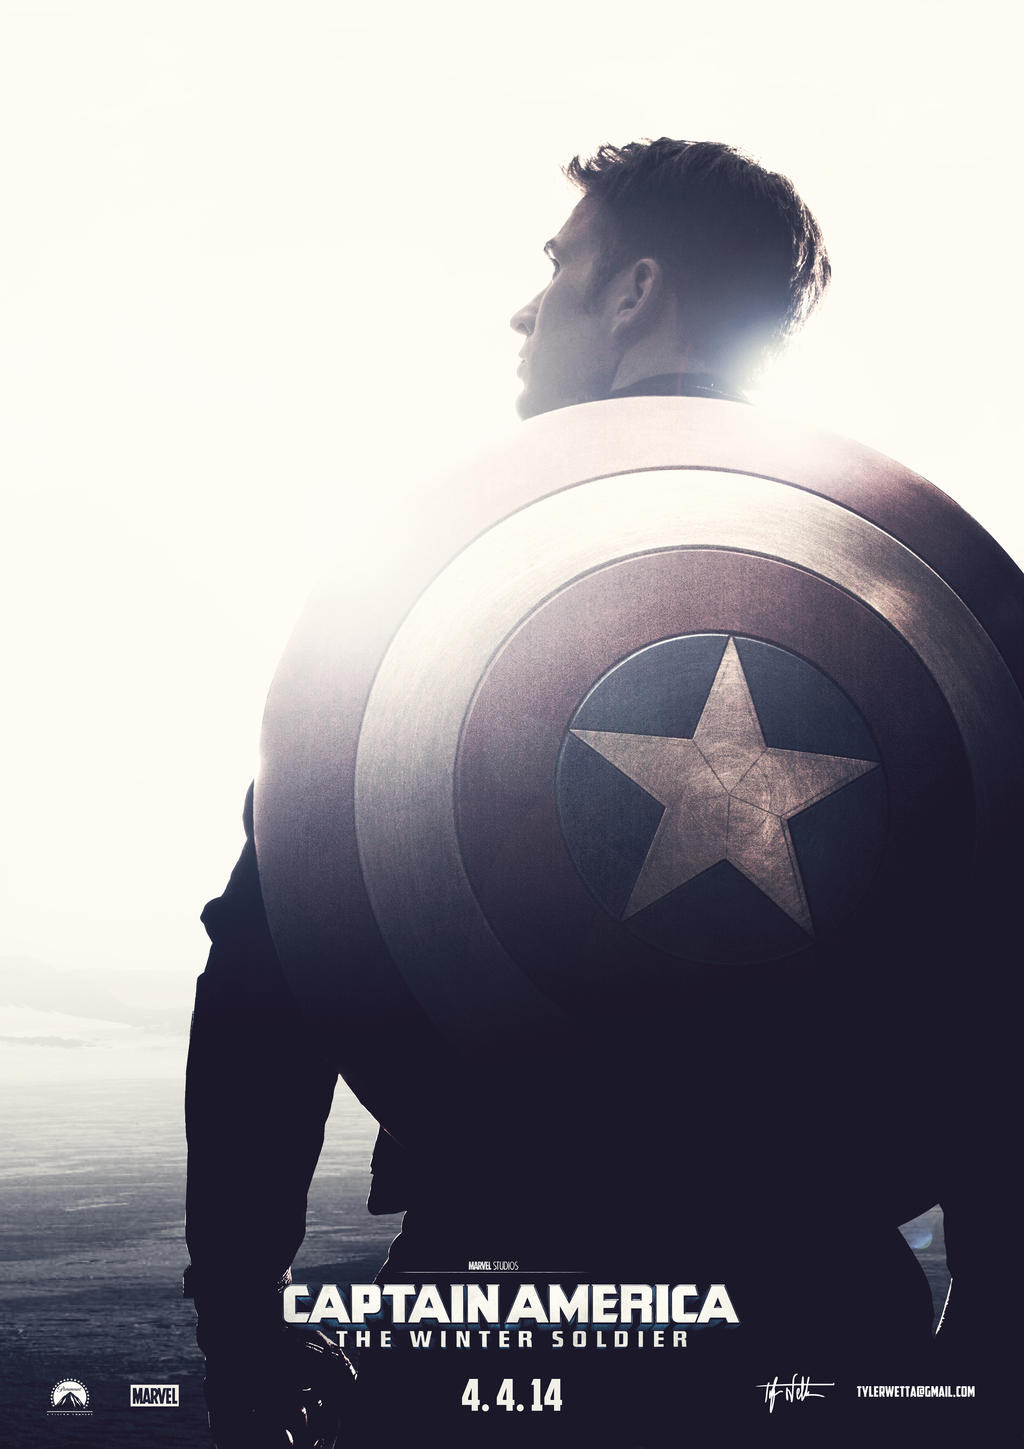 captain_america__the_winter_soldier_movie_poster_by_ancoradesign-d6lrrfl.jpg